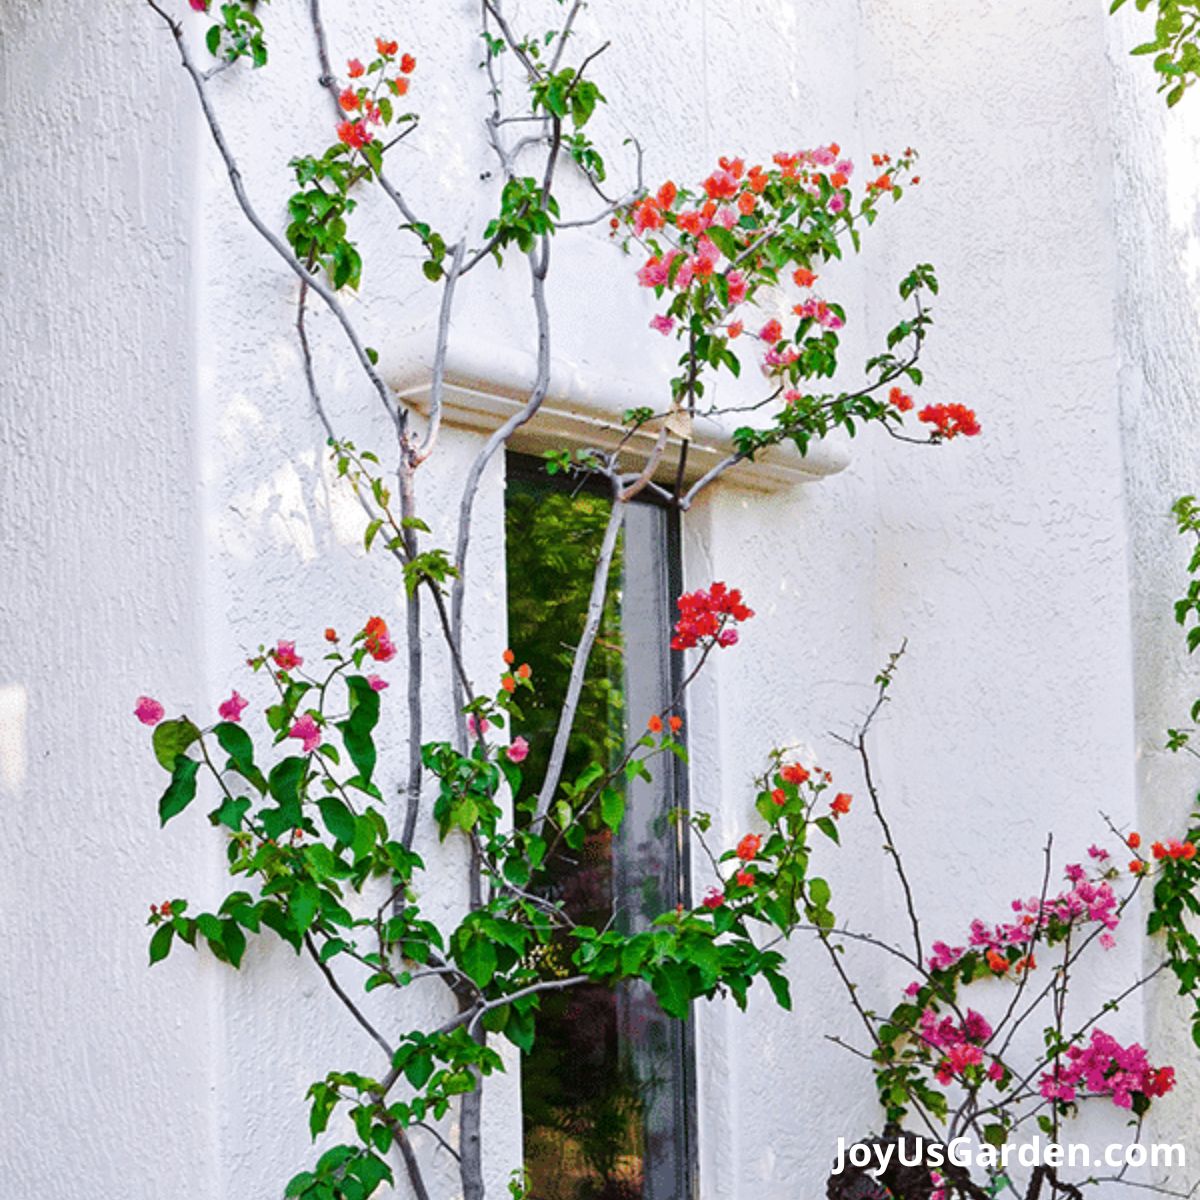 thin bougainvilleas in spring with a few flowers growing against a white house